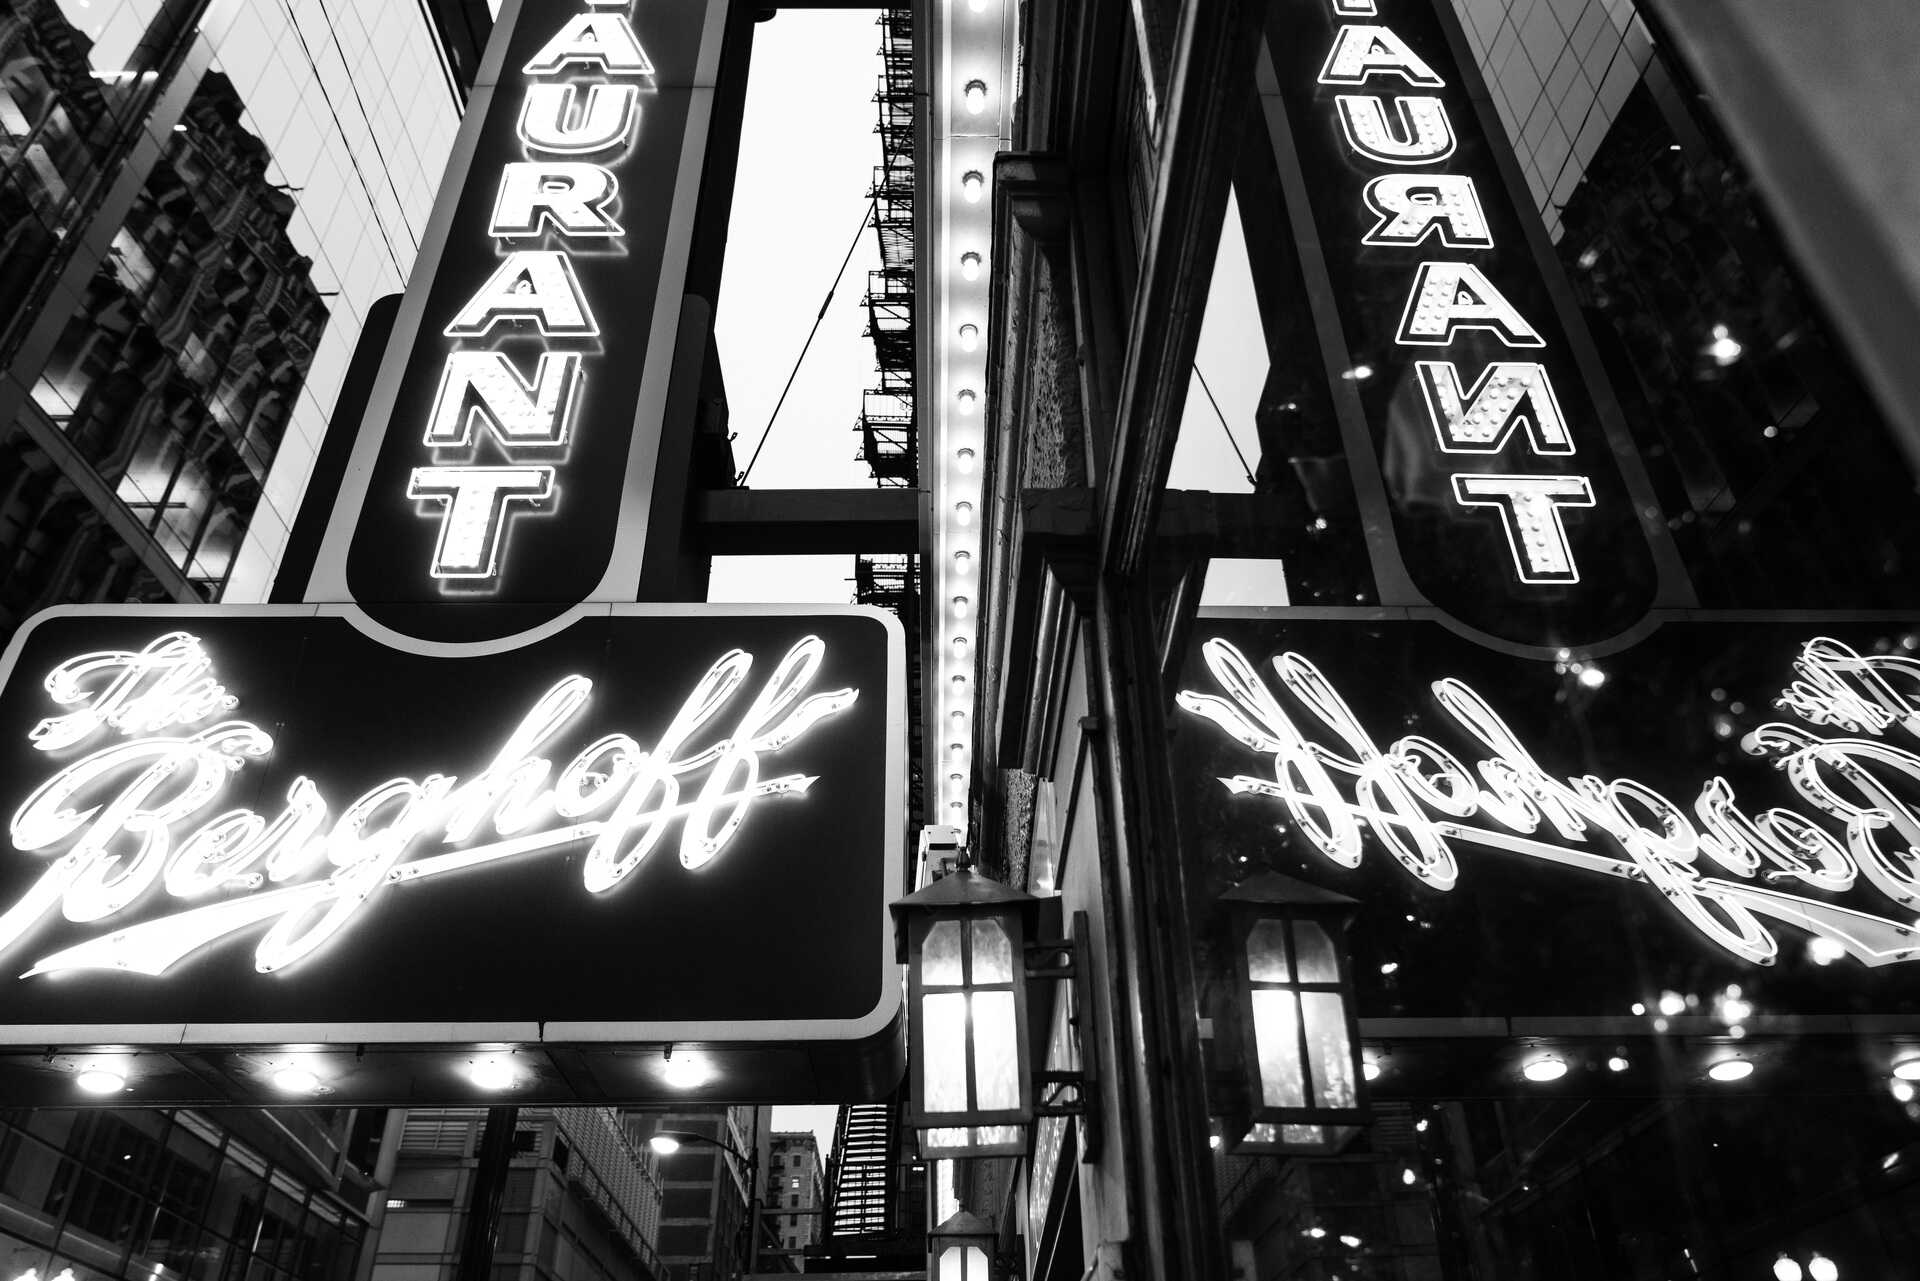 The Berghoff Restaurant sign in Chicago, Illinois